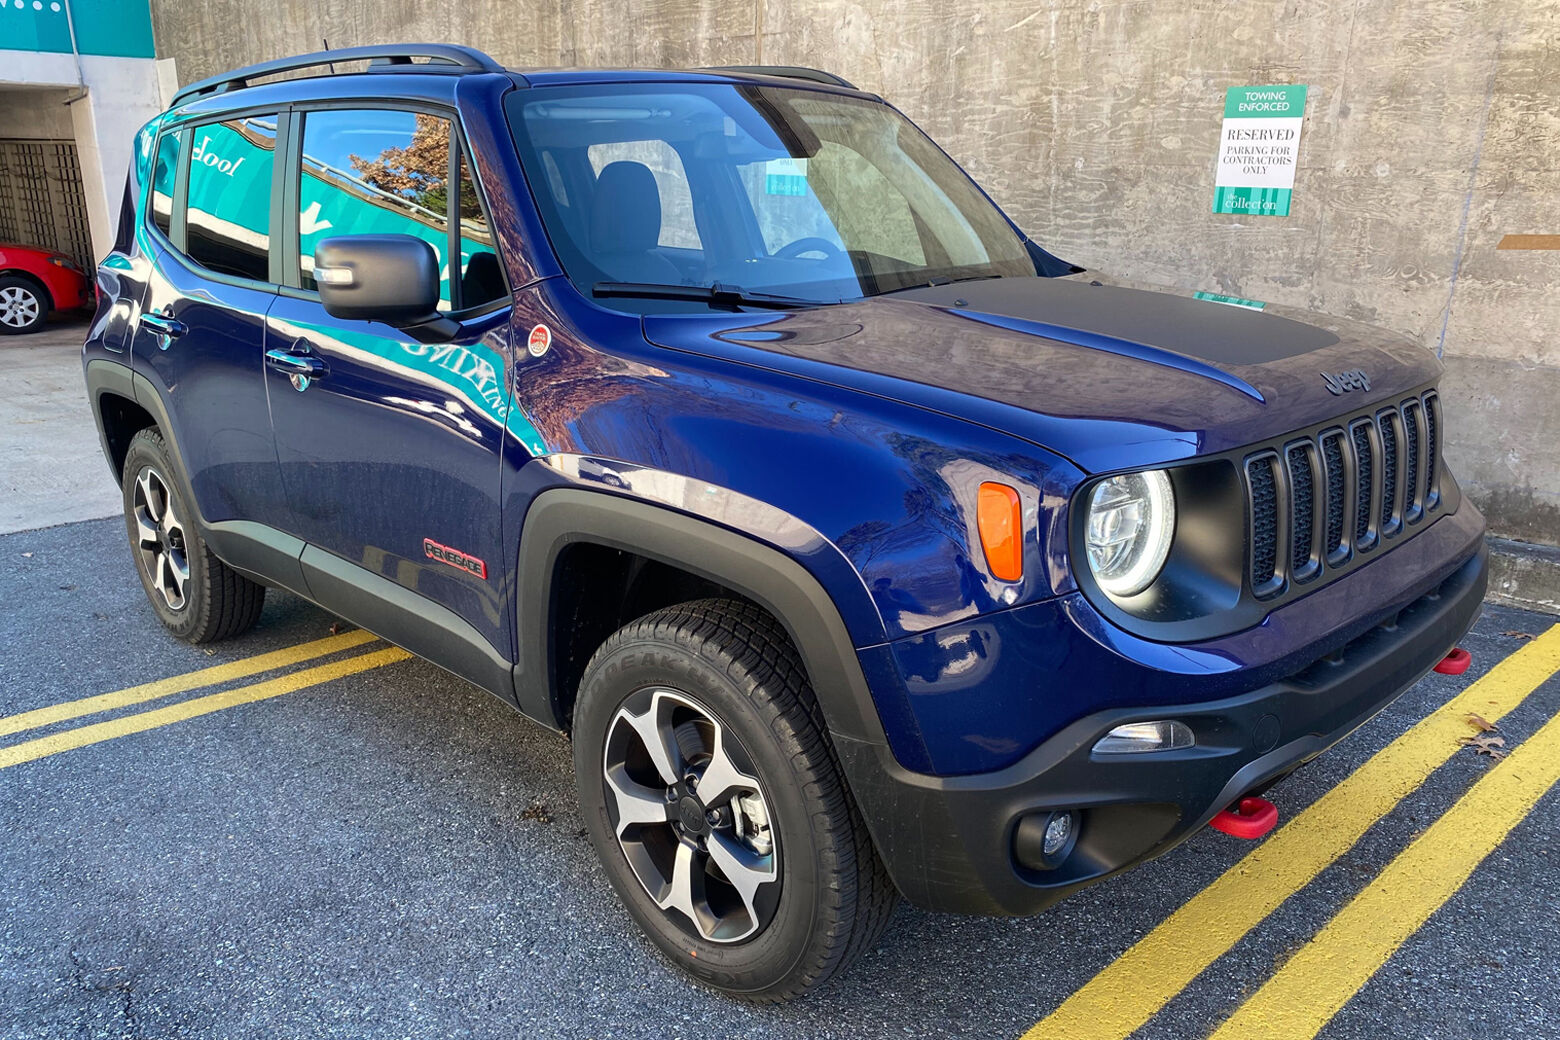 Exterior of the Jeep Renegade